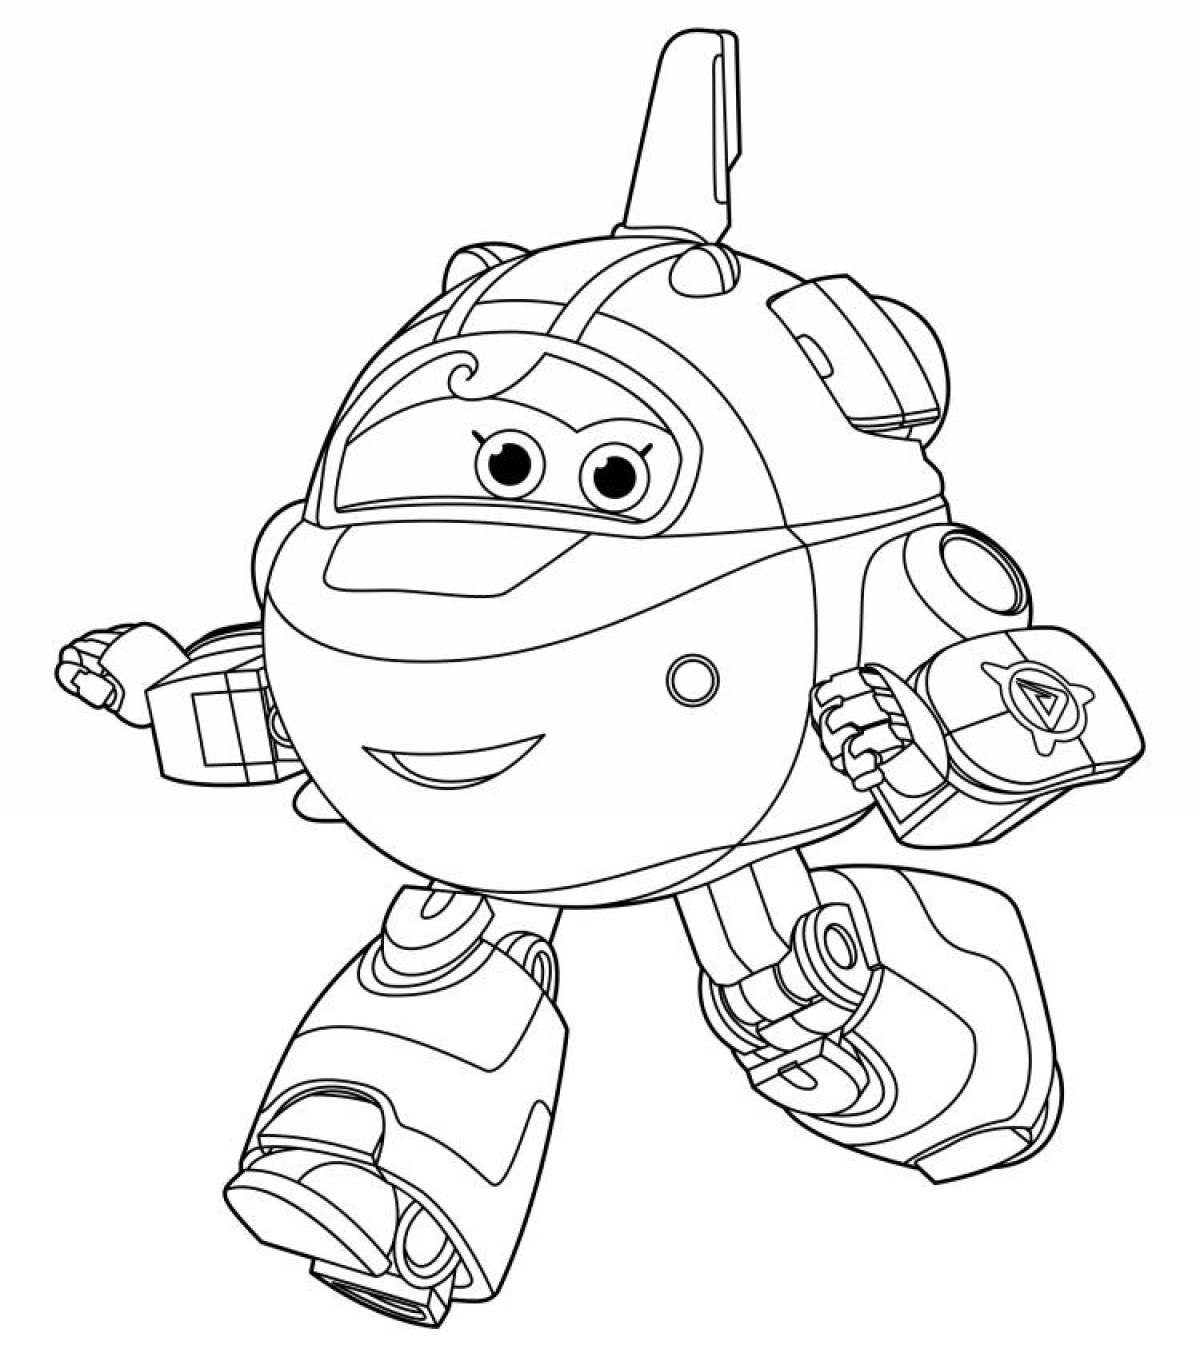 Zany dino team coloring page